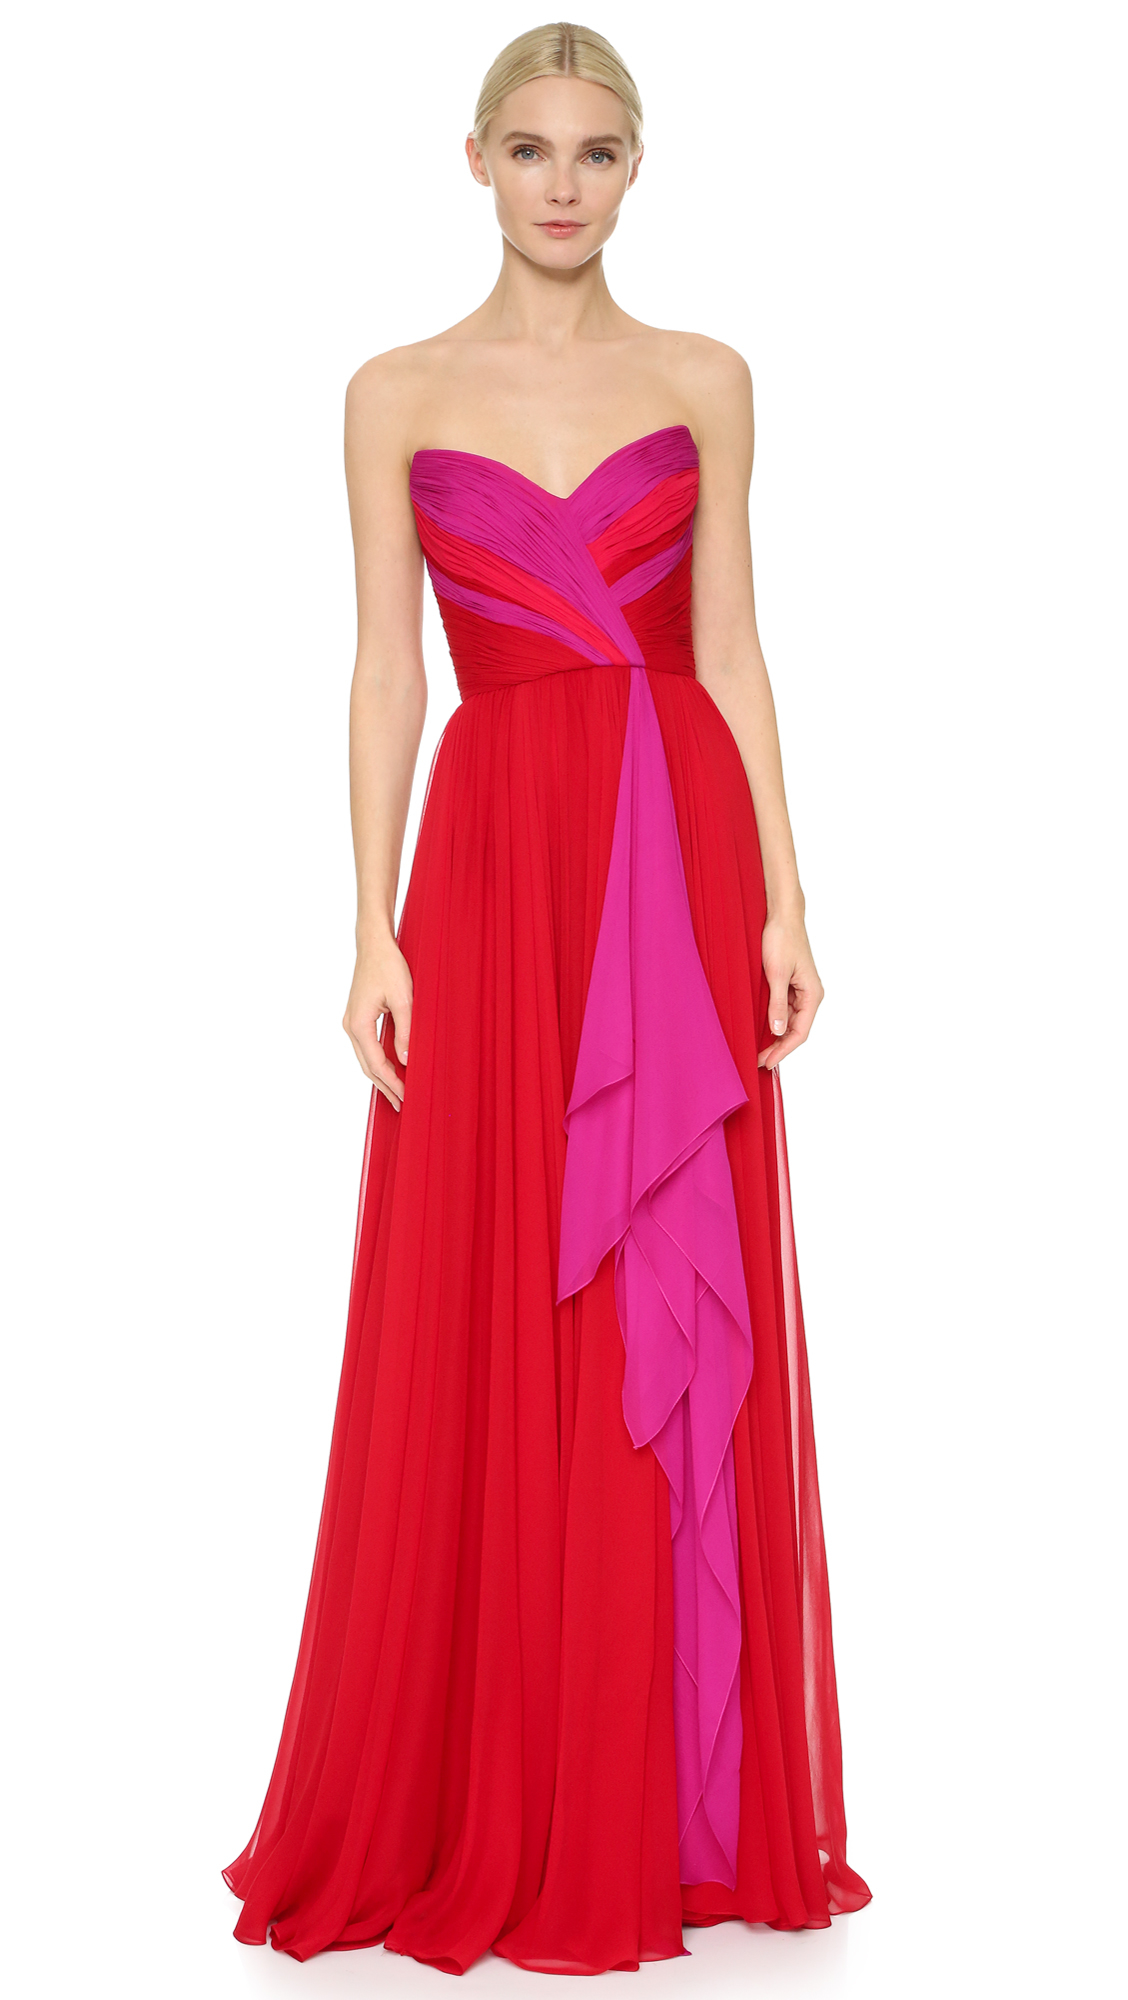 Reem Acra Strapless Chiffon Gown in Red ...